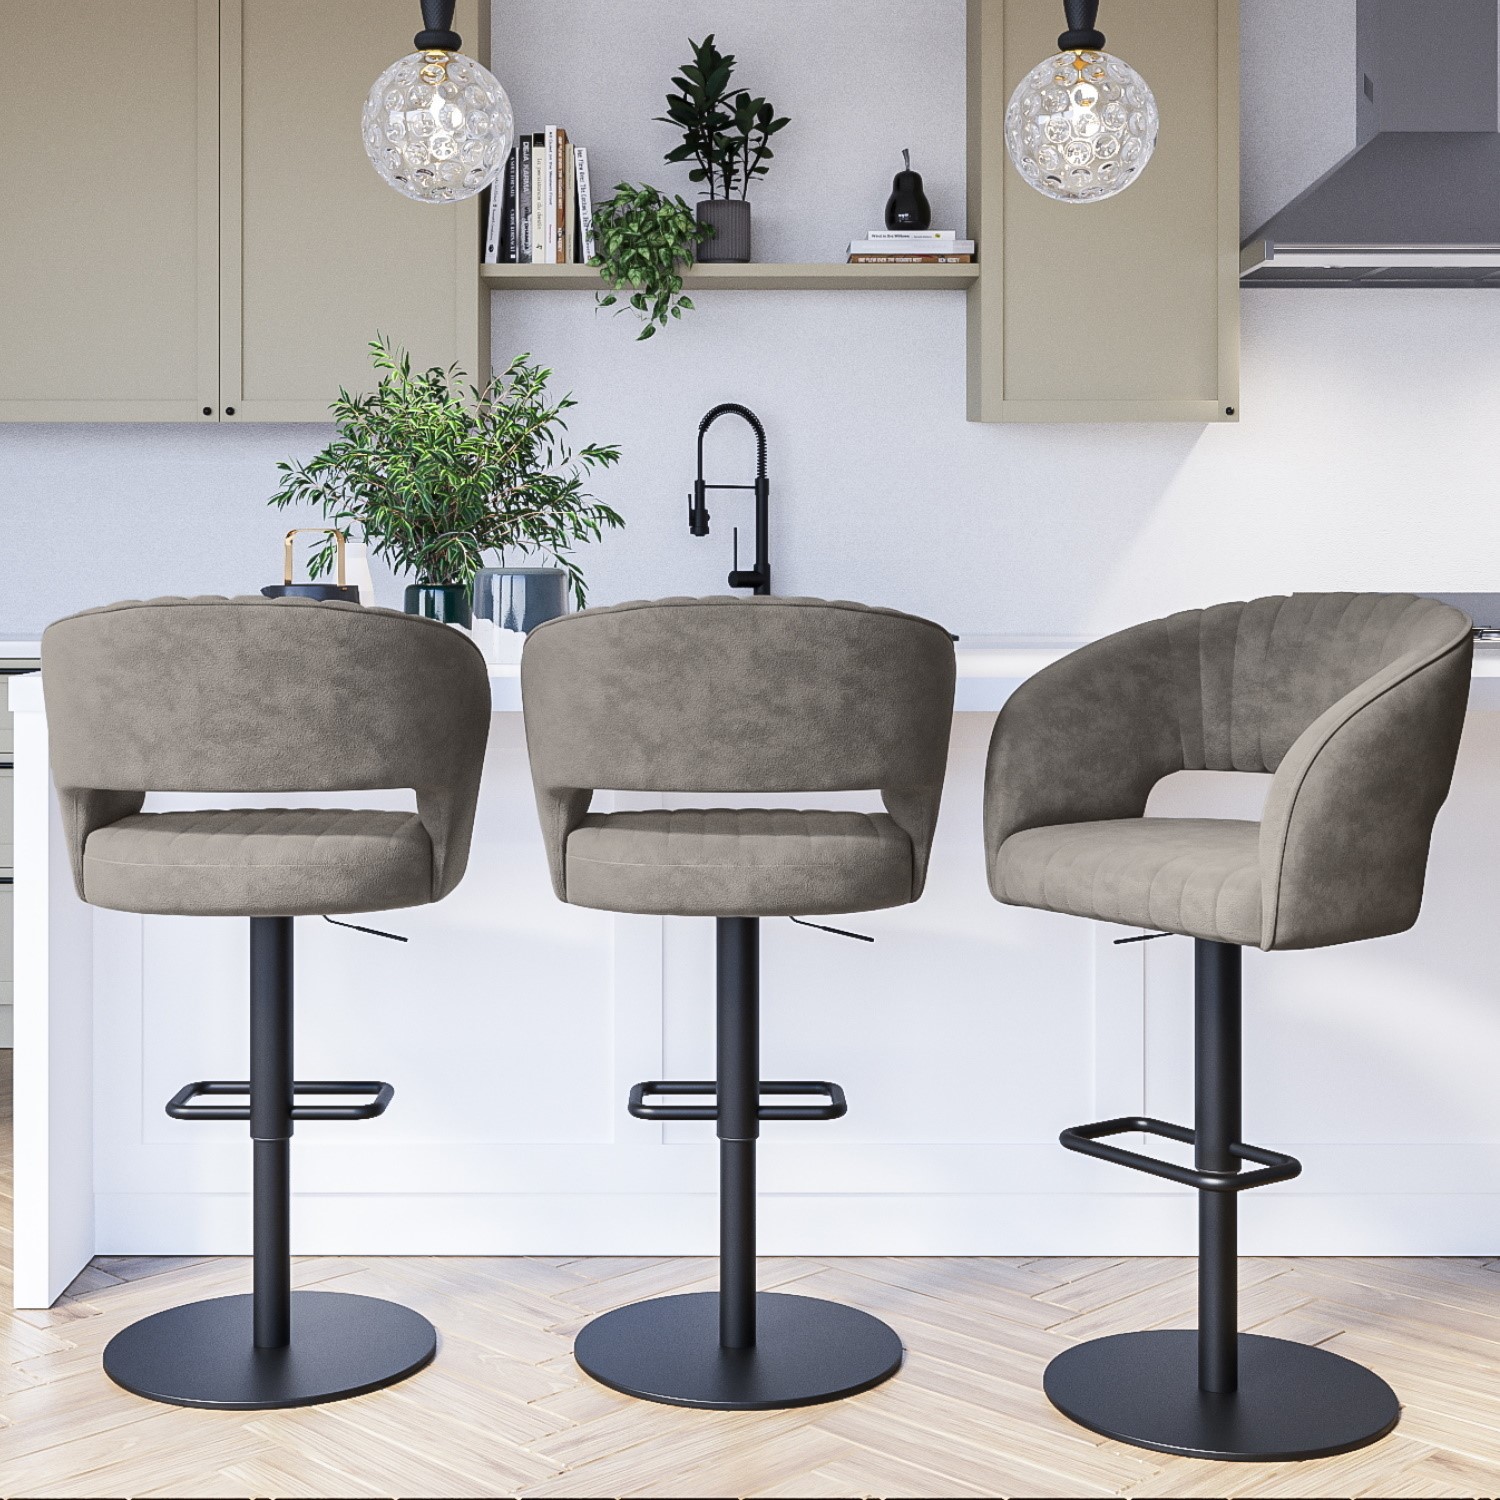 Photo of Set of 3 curved dove grey faux leather adjustable bar stools with backs - runa